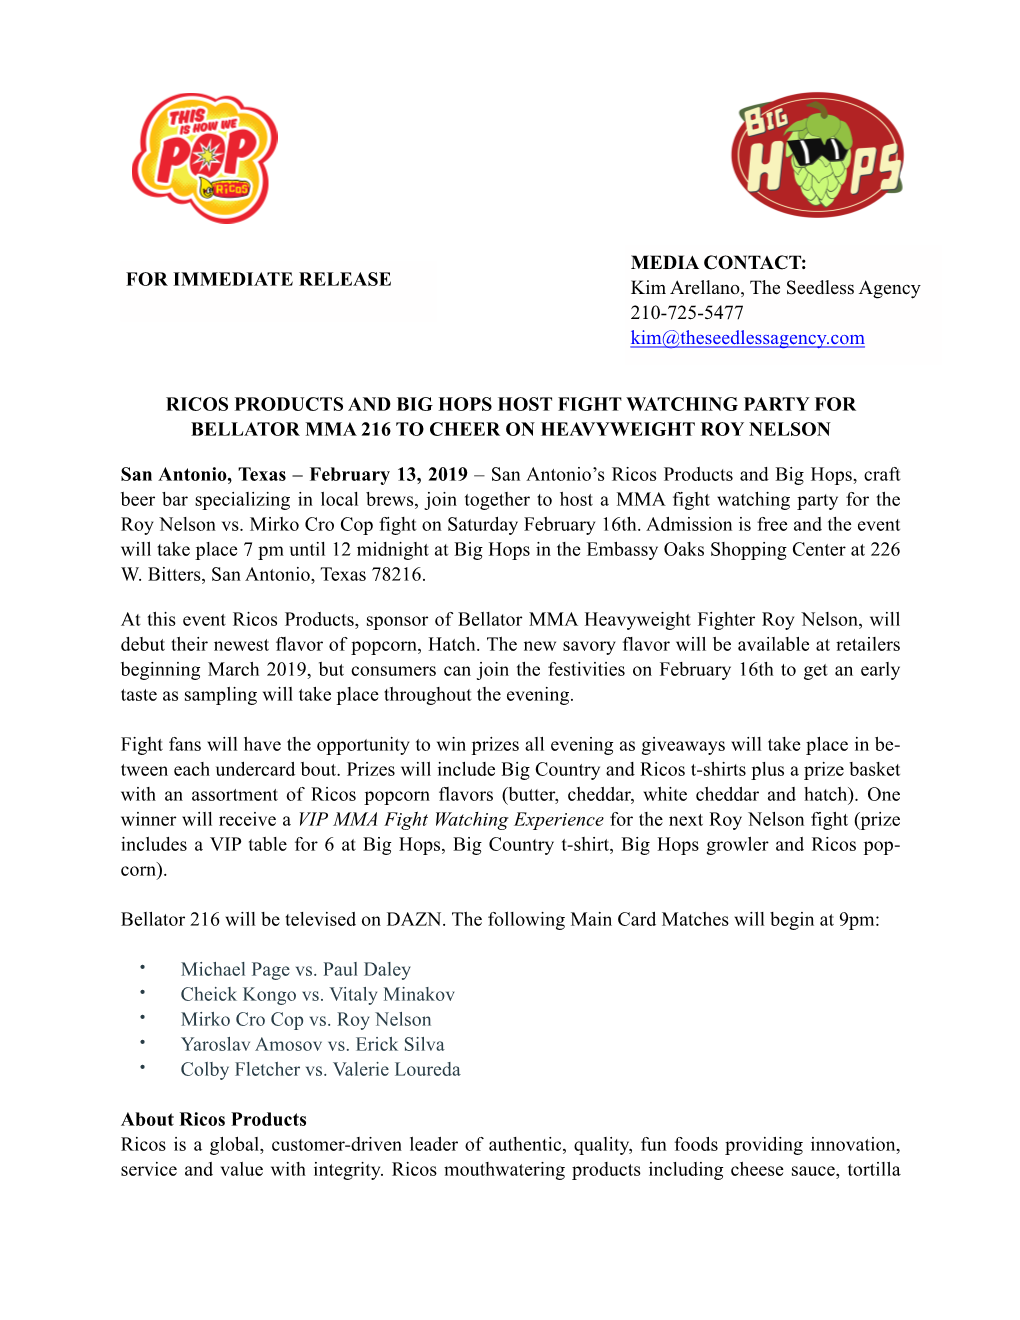 Ricos Roy Nelson Watch Party Press Release 2-13-19